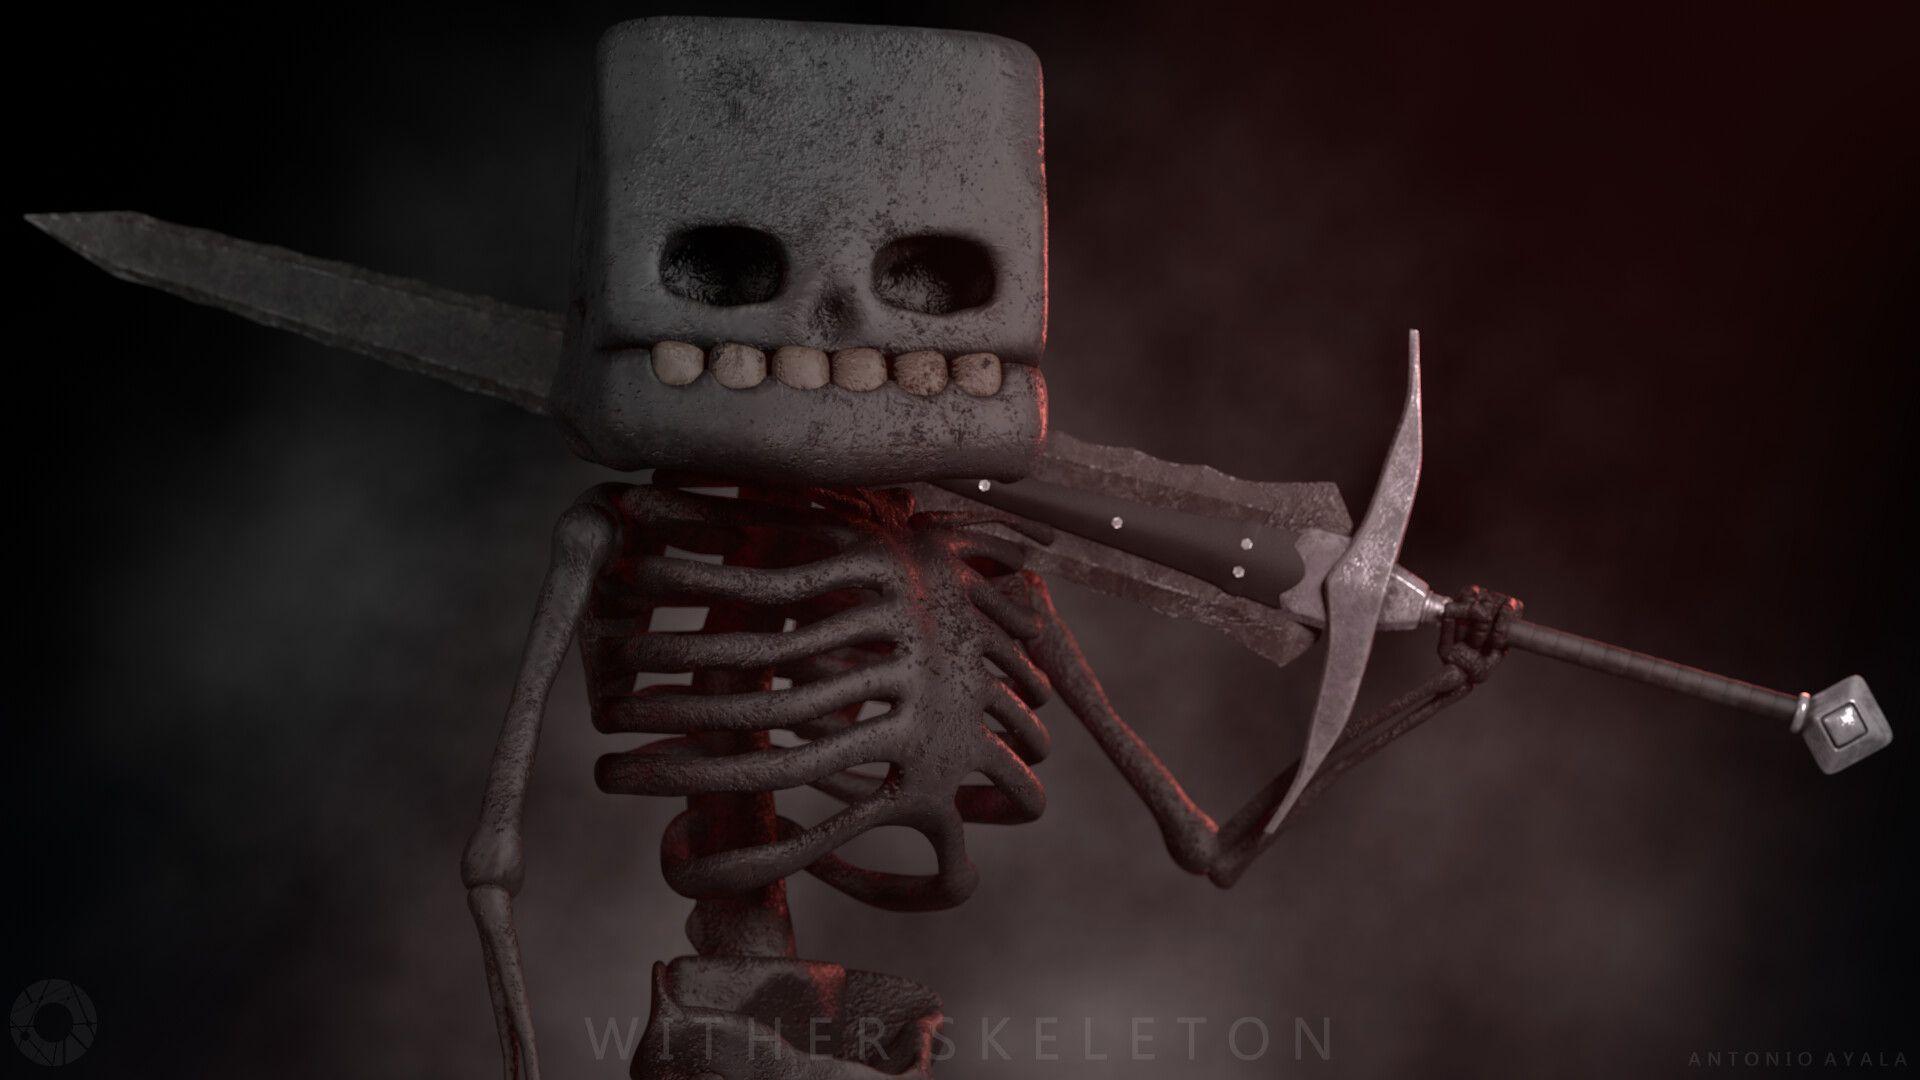 Minecraft Skeleton Wallpaper Hd Wallpapers Hd Backgrounds Tumblr | My ...